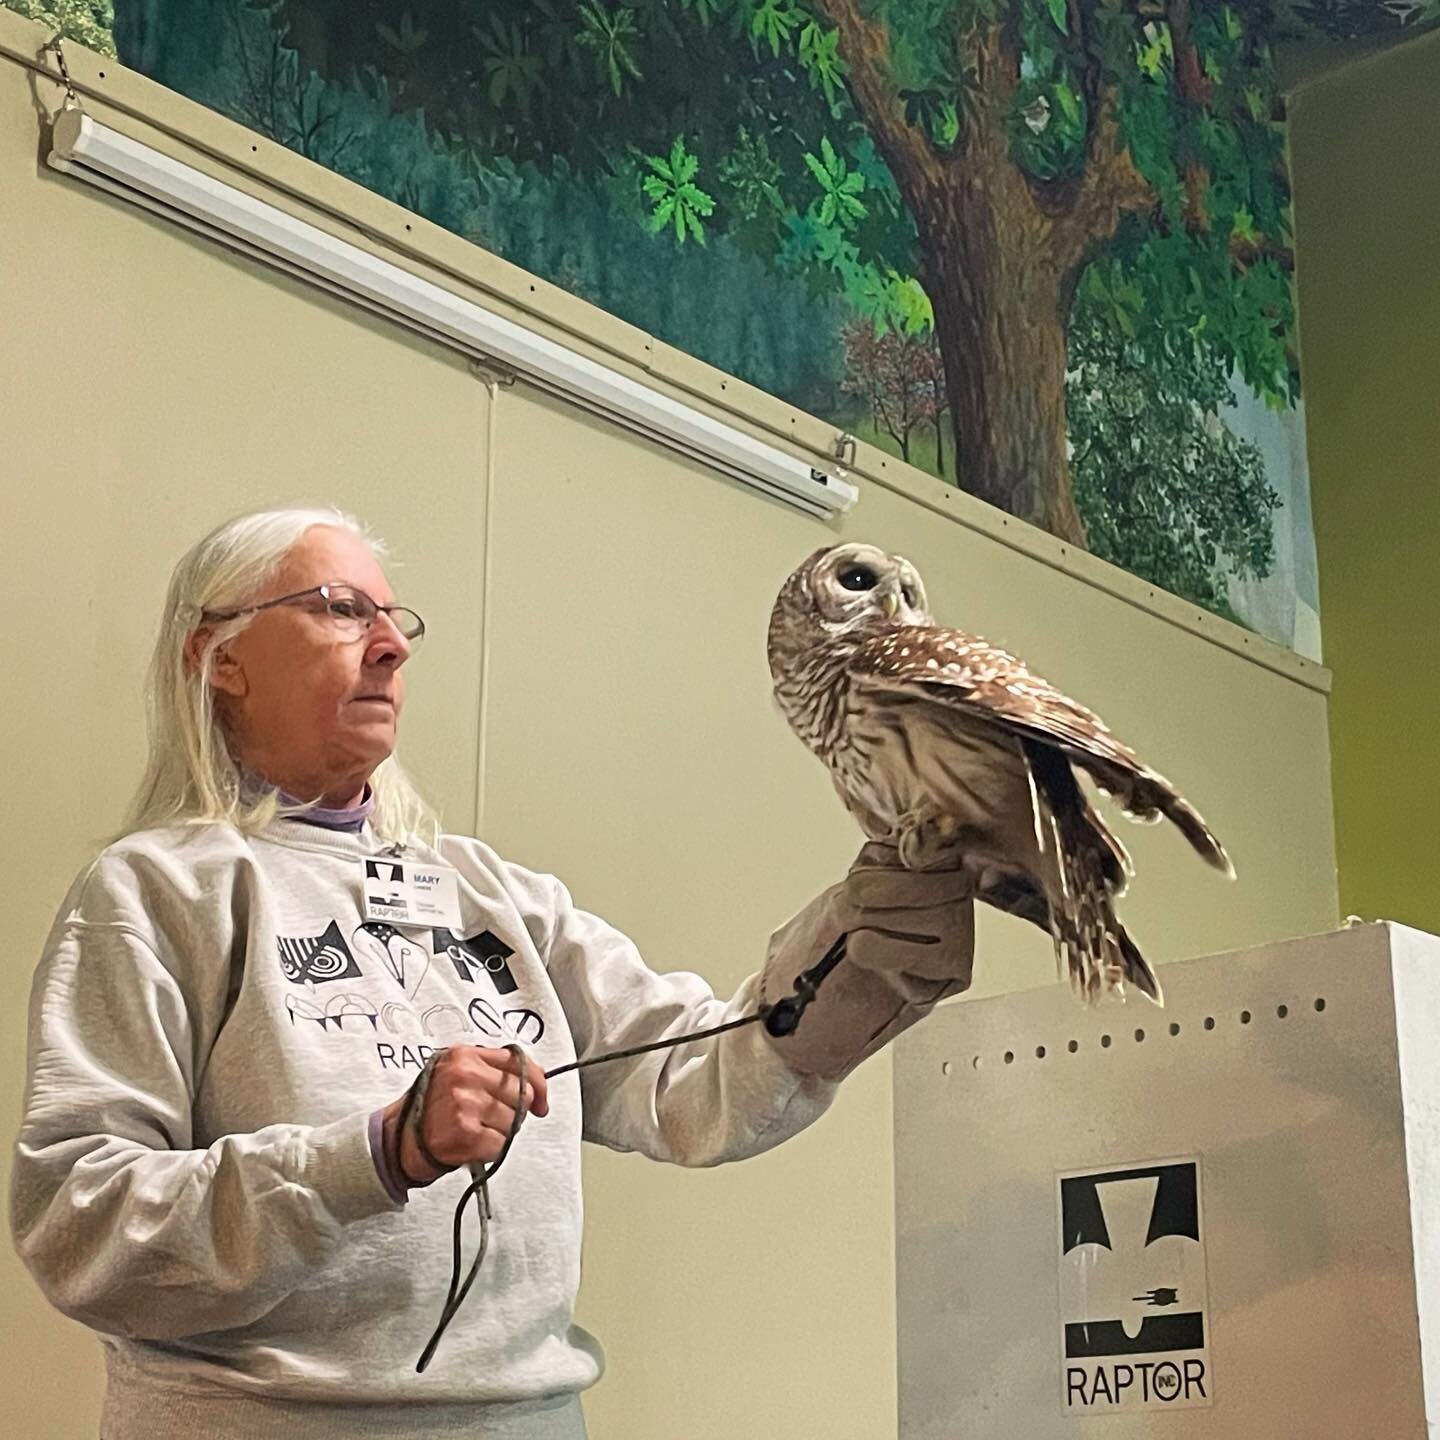 Today we had a great visit from Raptor Inc! We got to meet Spencer the barred owl, Apollo the peregrine falcon, and Earl the turkey vulture. Big thanks to @raptor_inc for this magical and informative visit 🦉